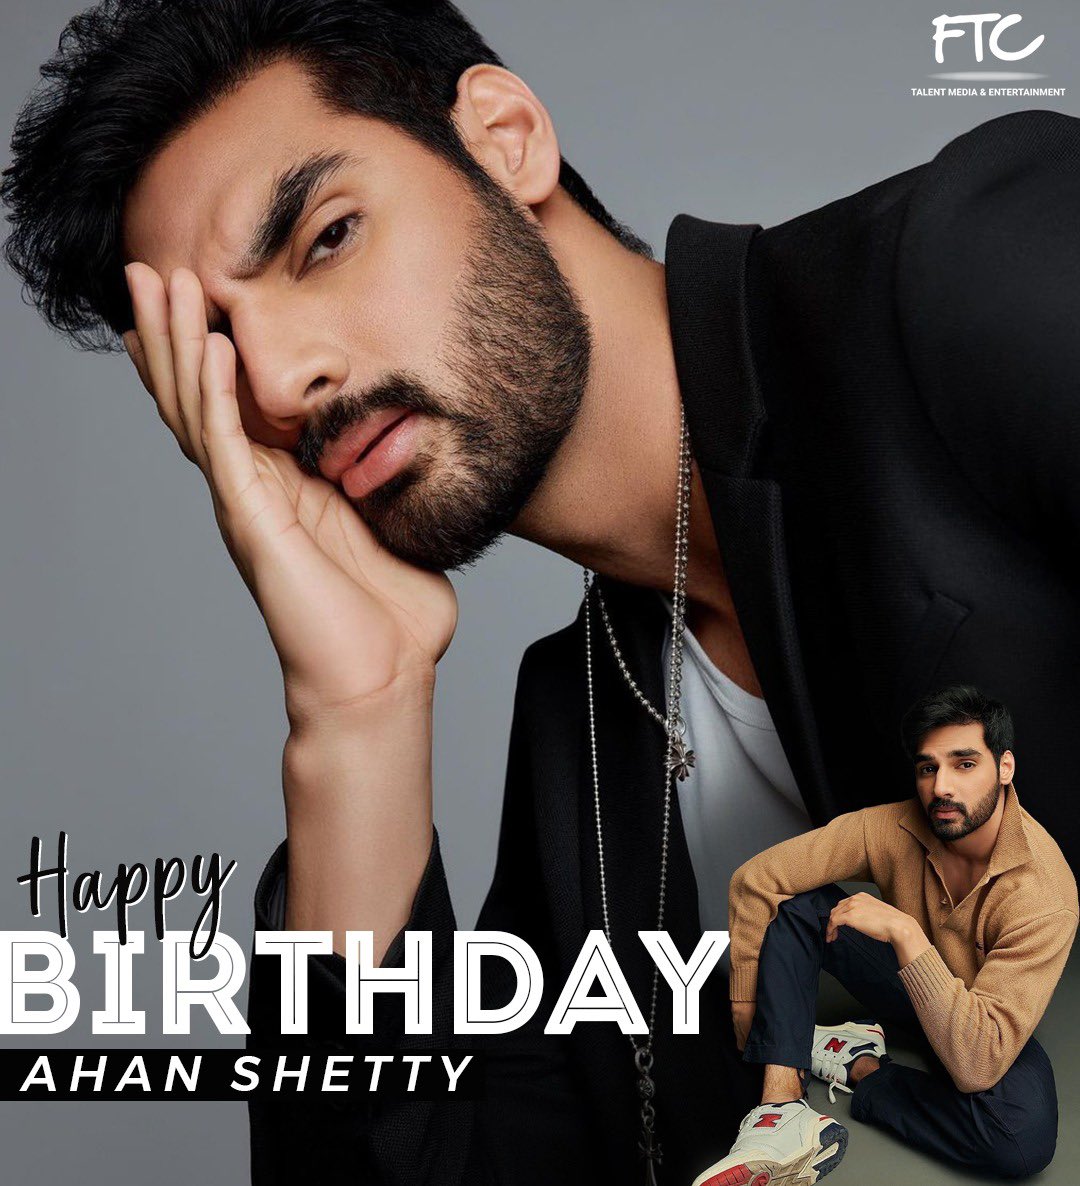 Happy birthday to the extraordinary @AhanShetty ! 🎉✨ May this year bring you all the love, success, and magical moments you deserve. Cheers to celebrating you today and always! 🎂 #HappyBirthday #AhanShetty